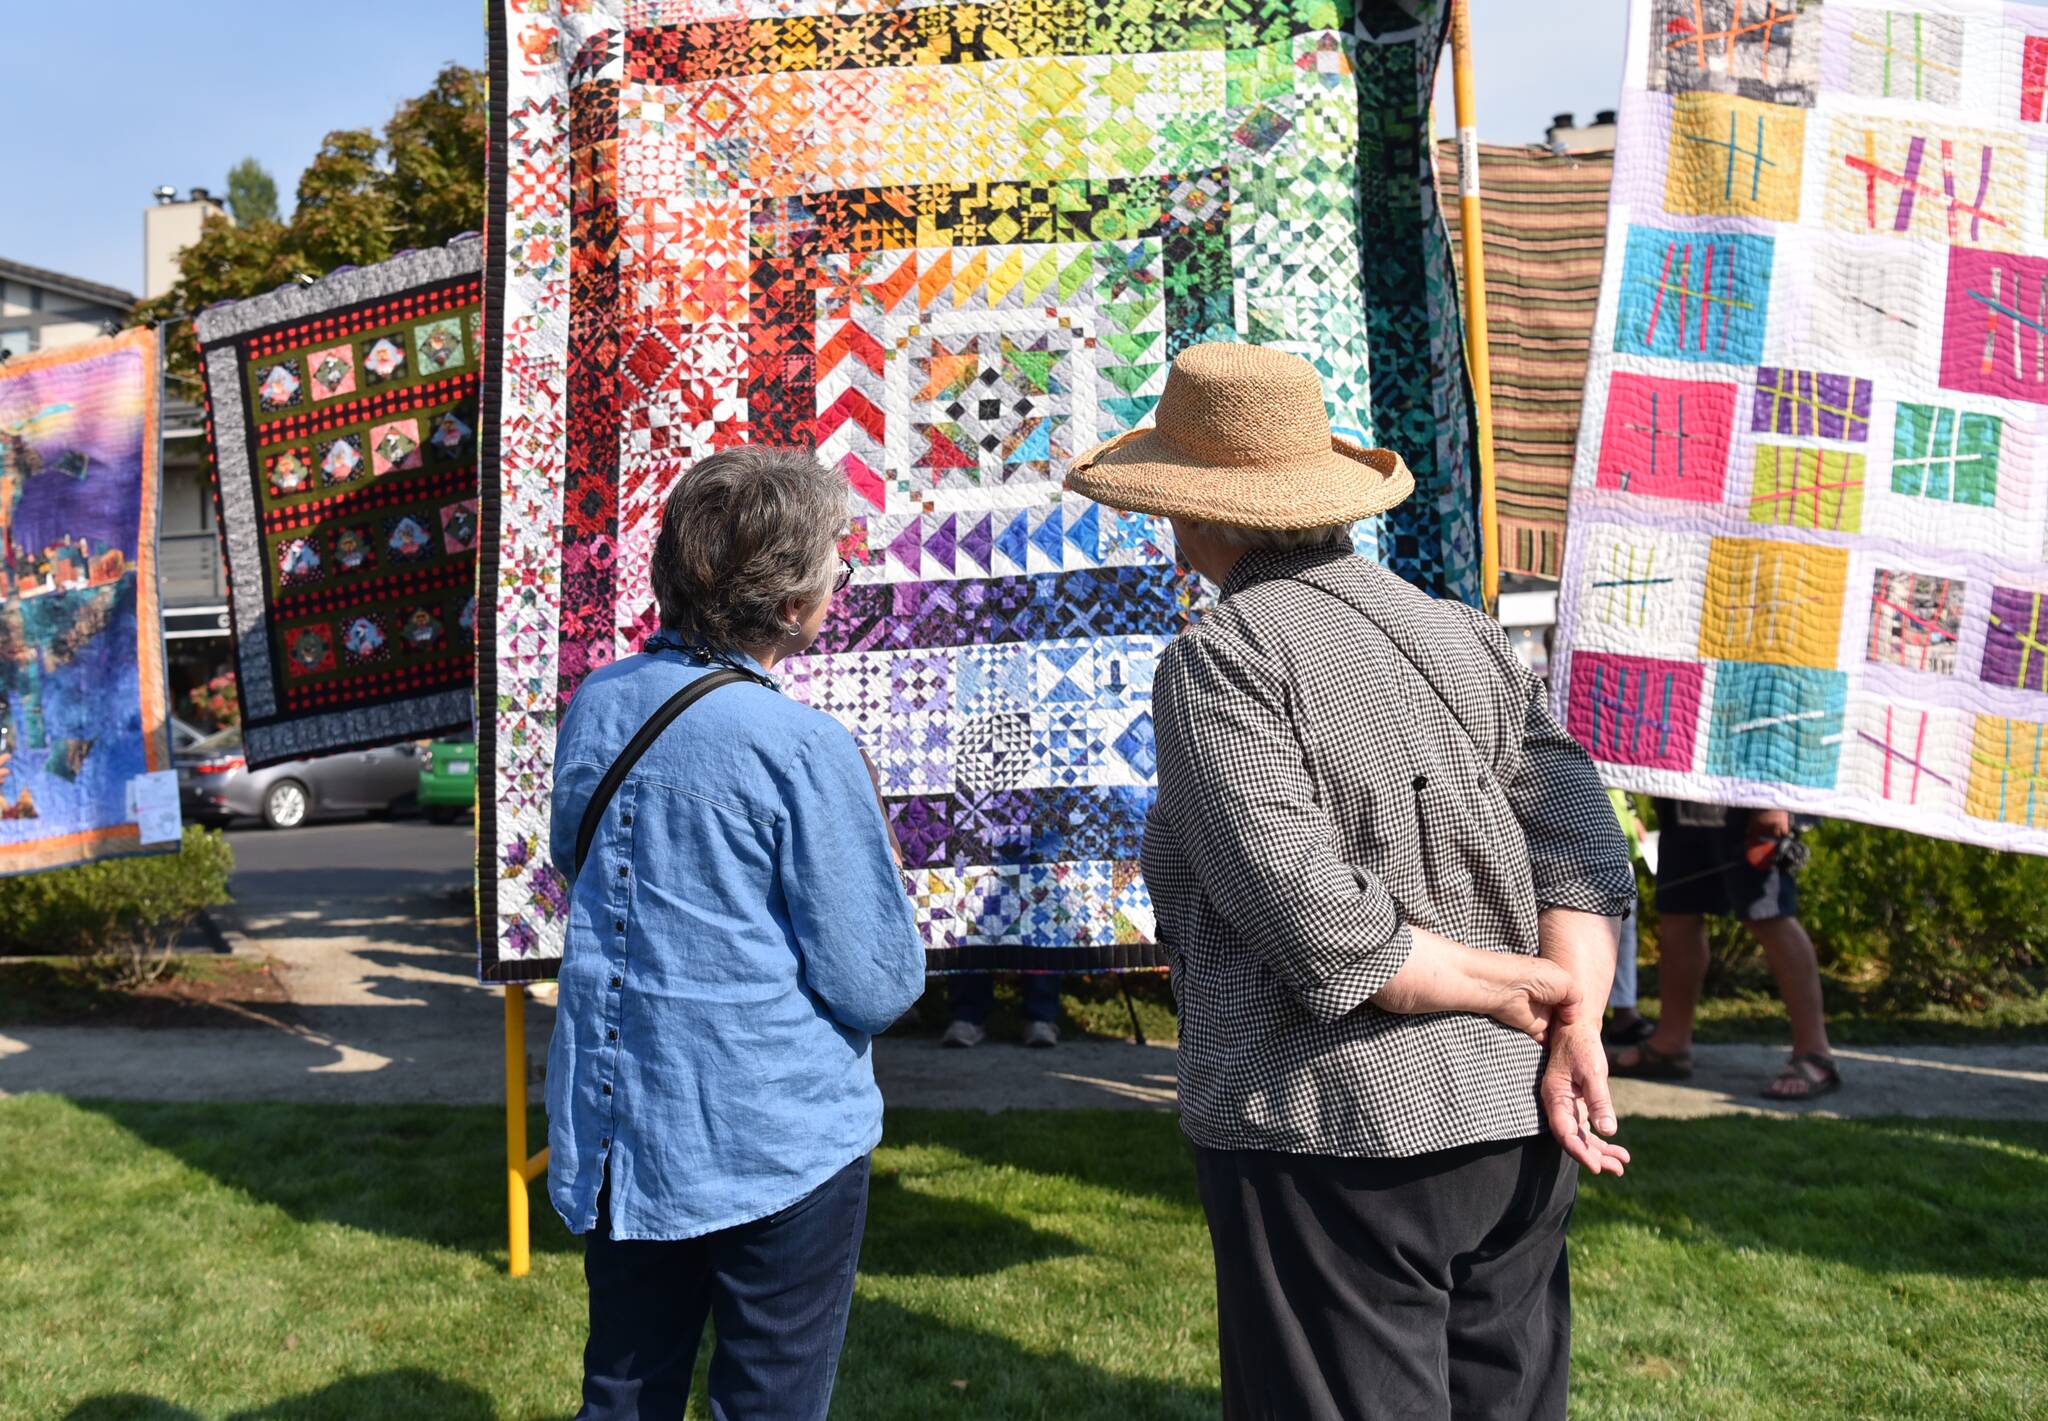 Friends Martin Gibbons and Joan Wenske drove from Port Townsend to view quilts.